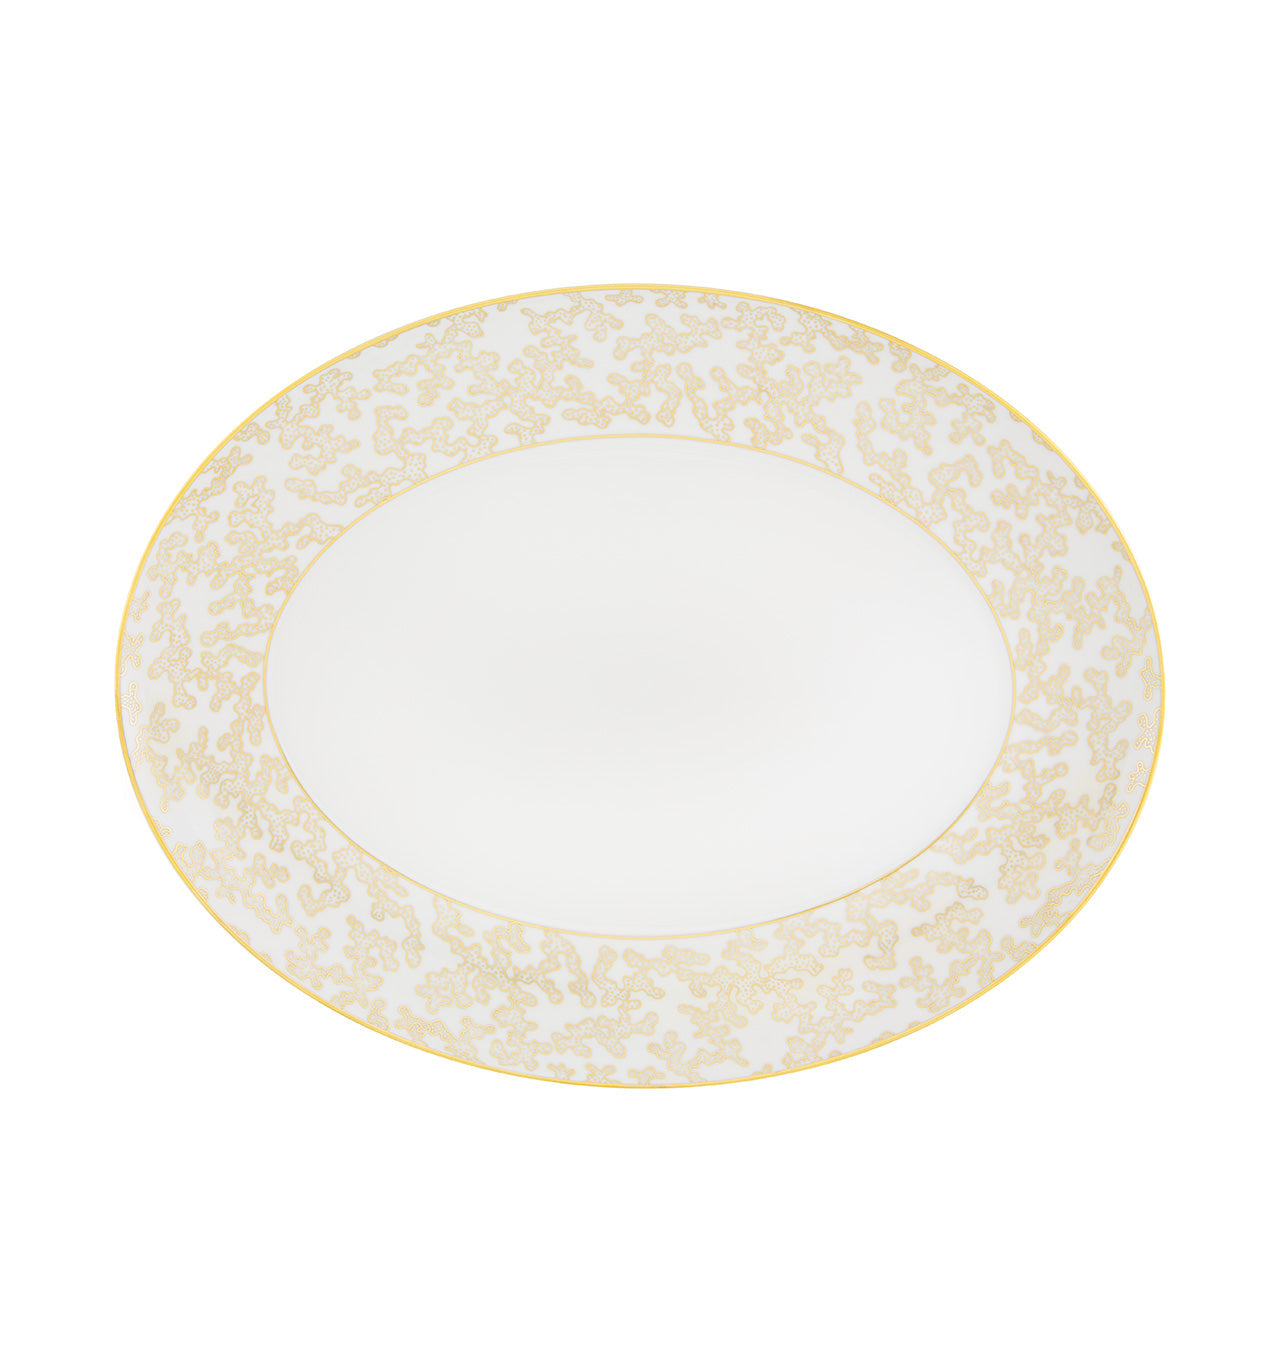 Cailloute - Large Oval Platter LAZADO